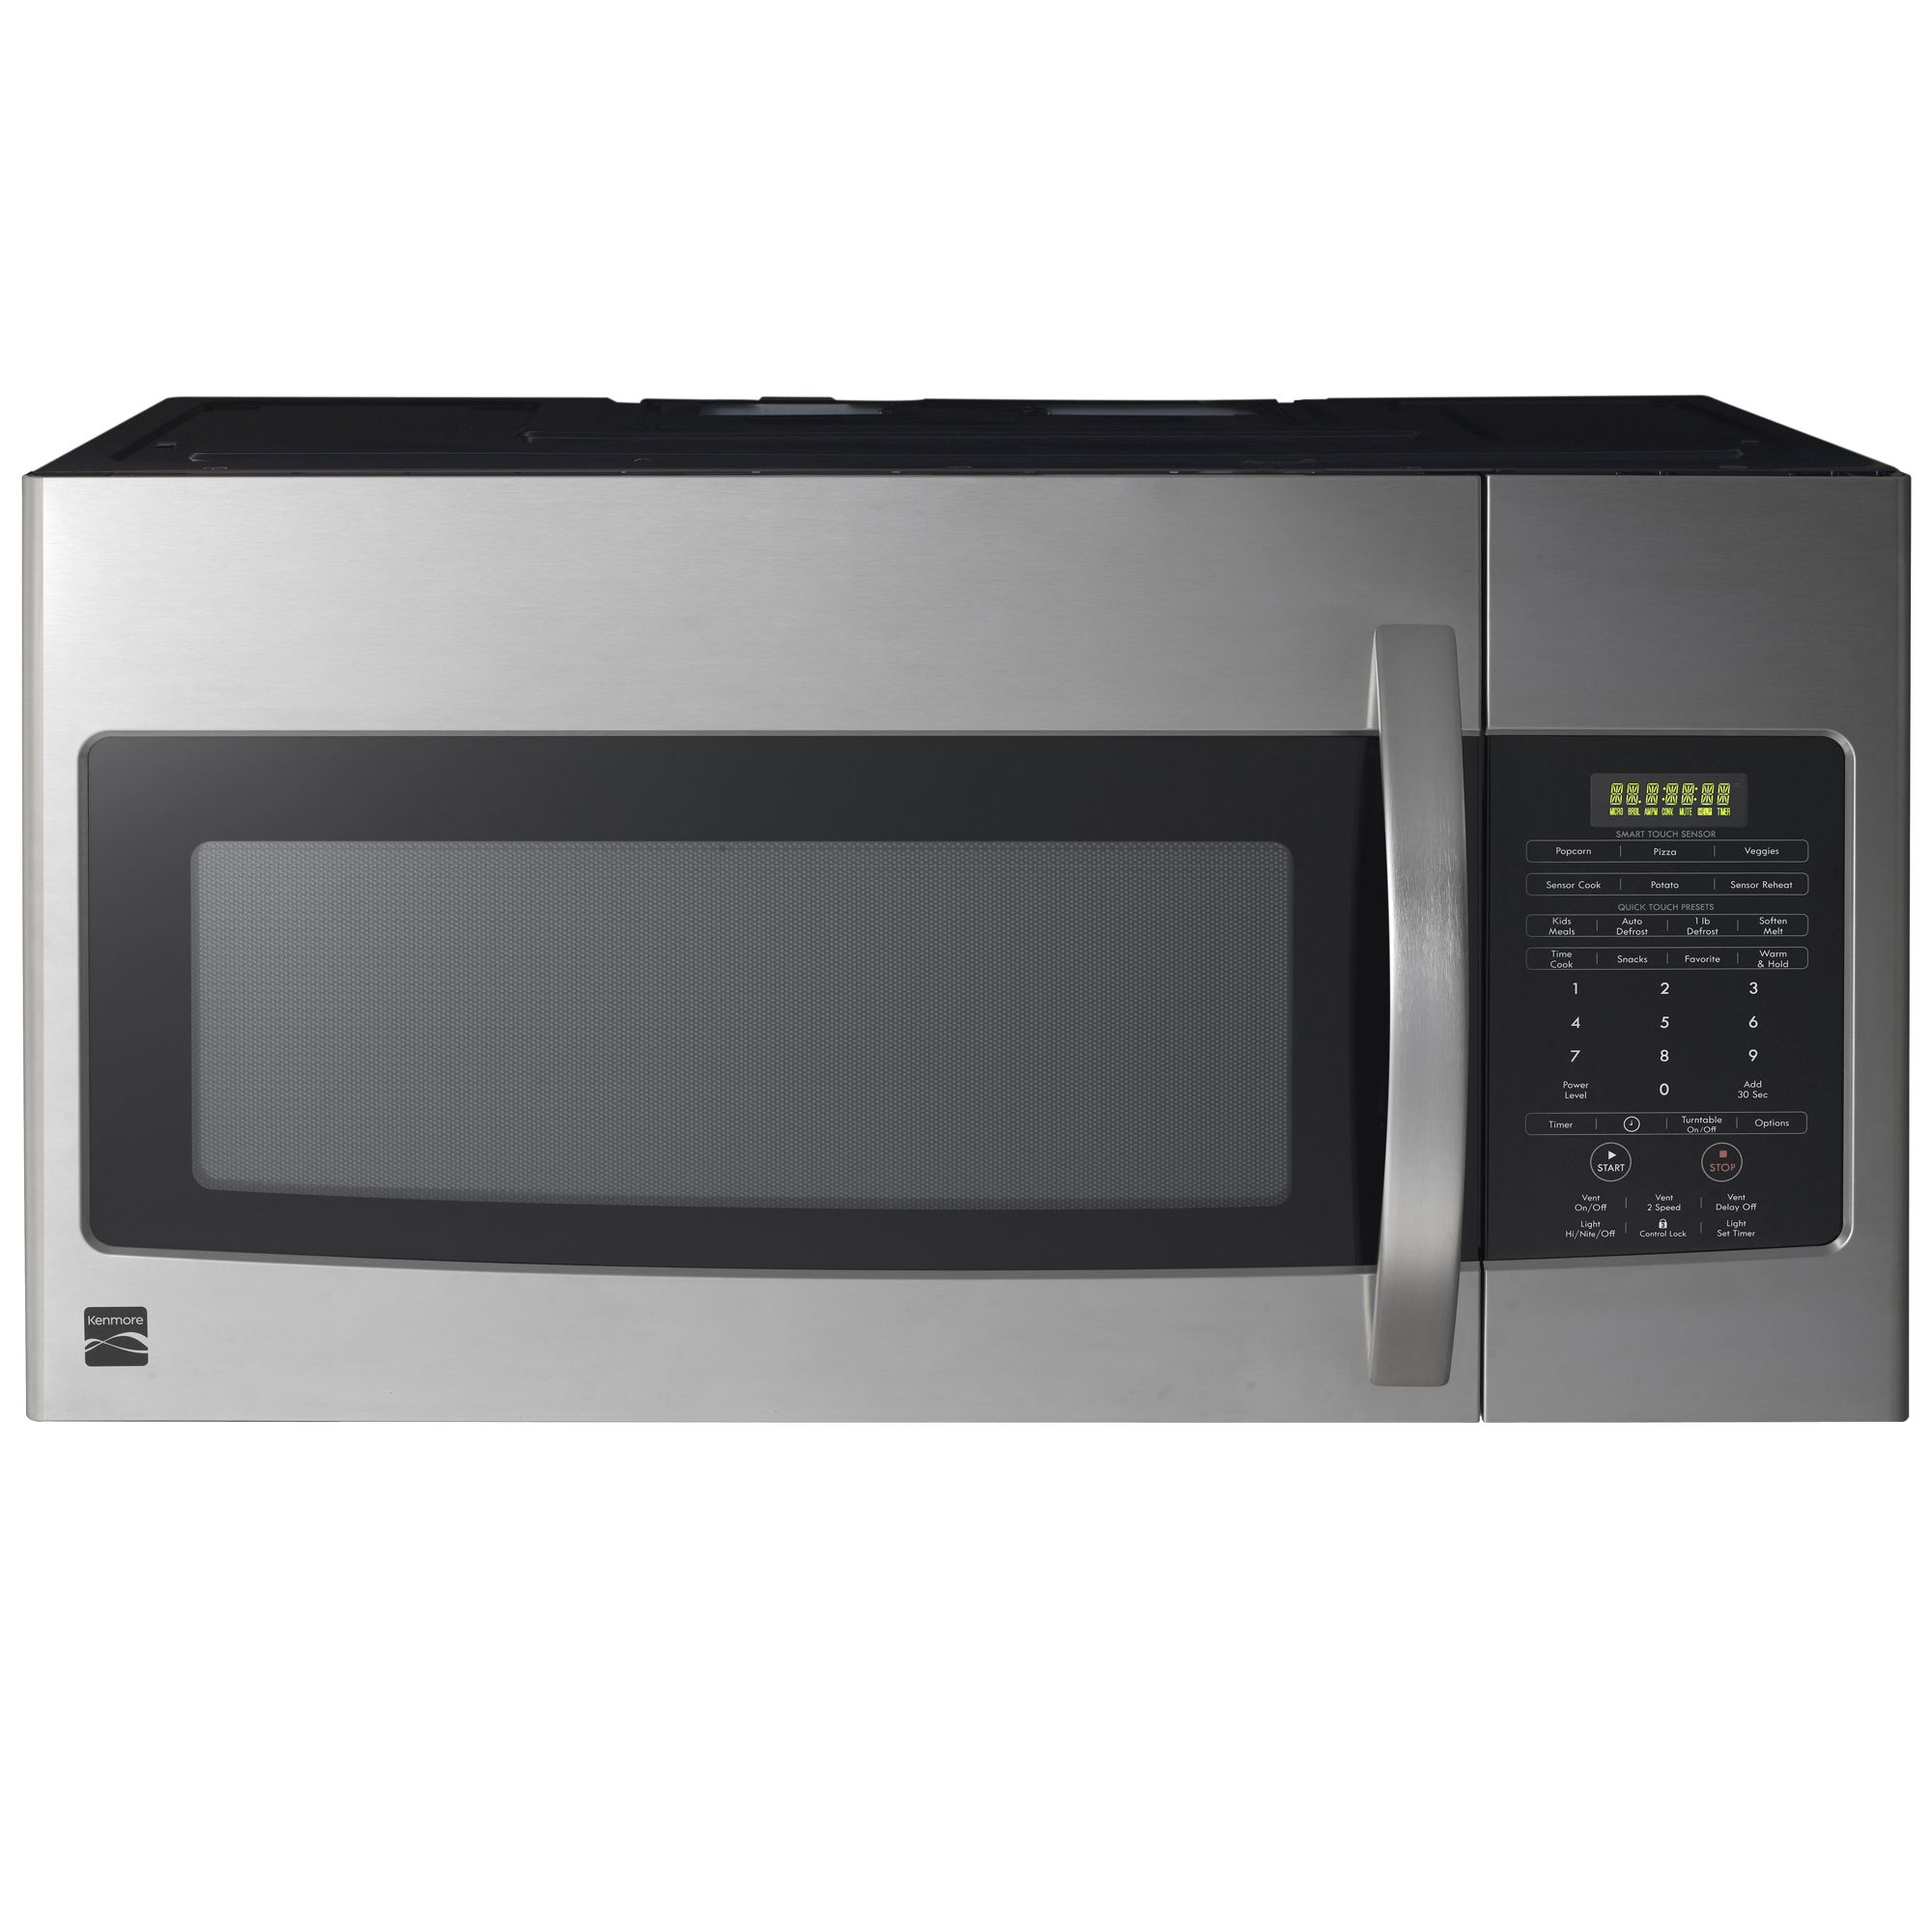 Kenmore Over the Range Microwave 1.7 cu. ft. 85043 in Stainless Steel